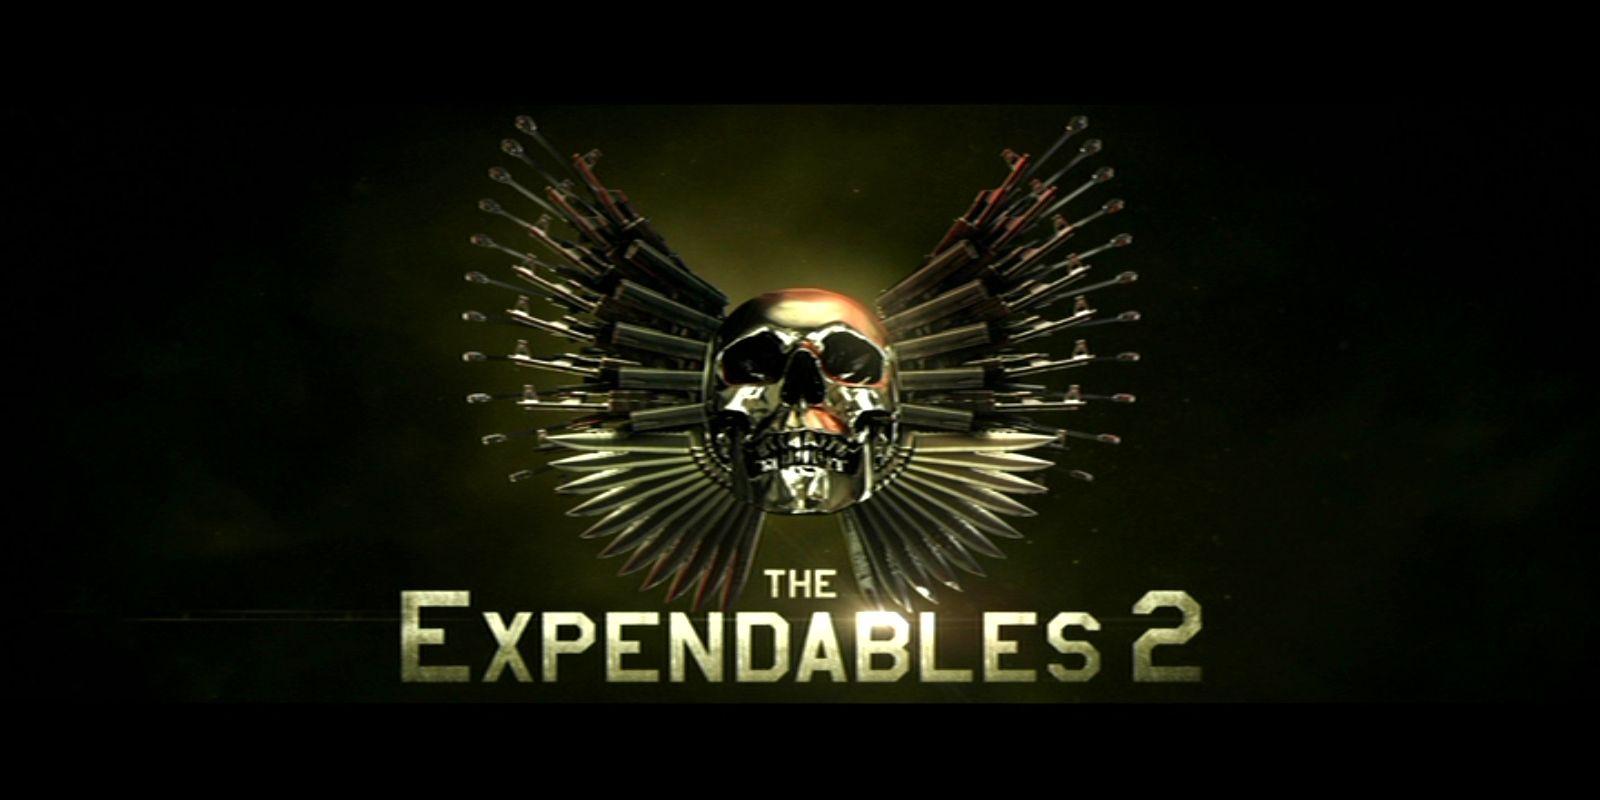 The Expendables 2 Wallpaper HD Download